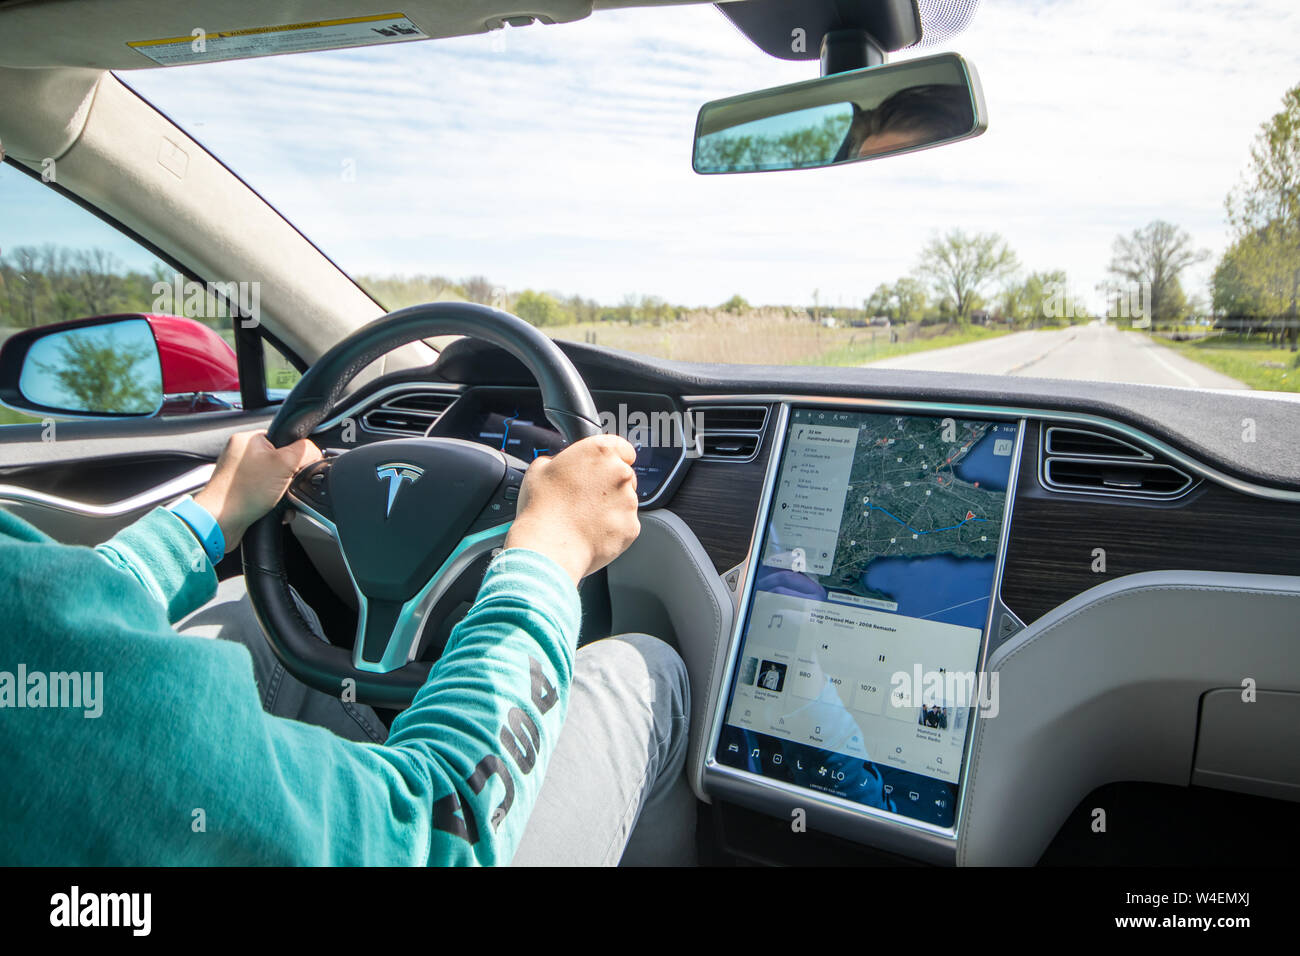 Man Driving Red Tesla Model S With Navigation On Screen